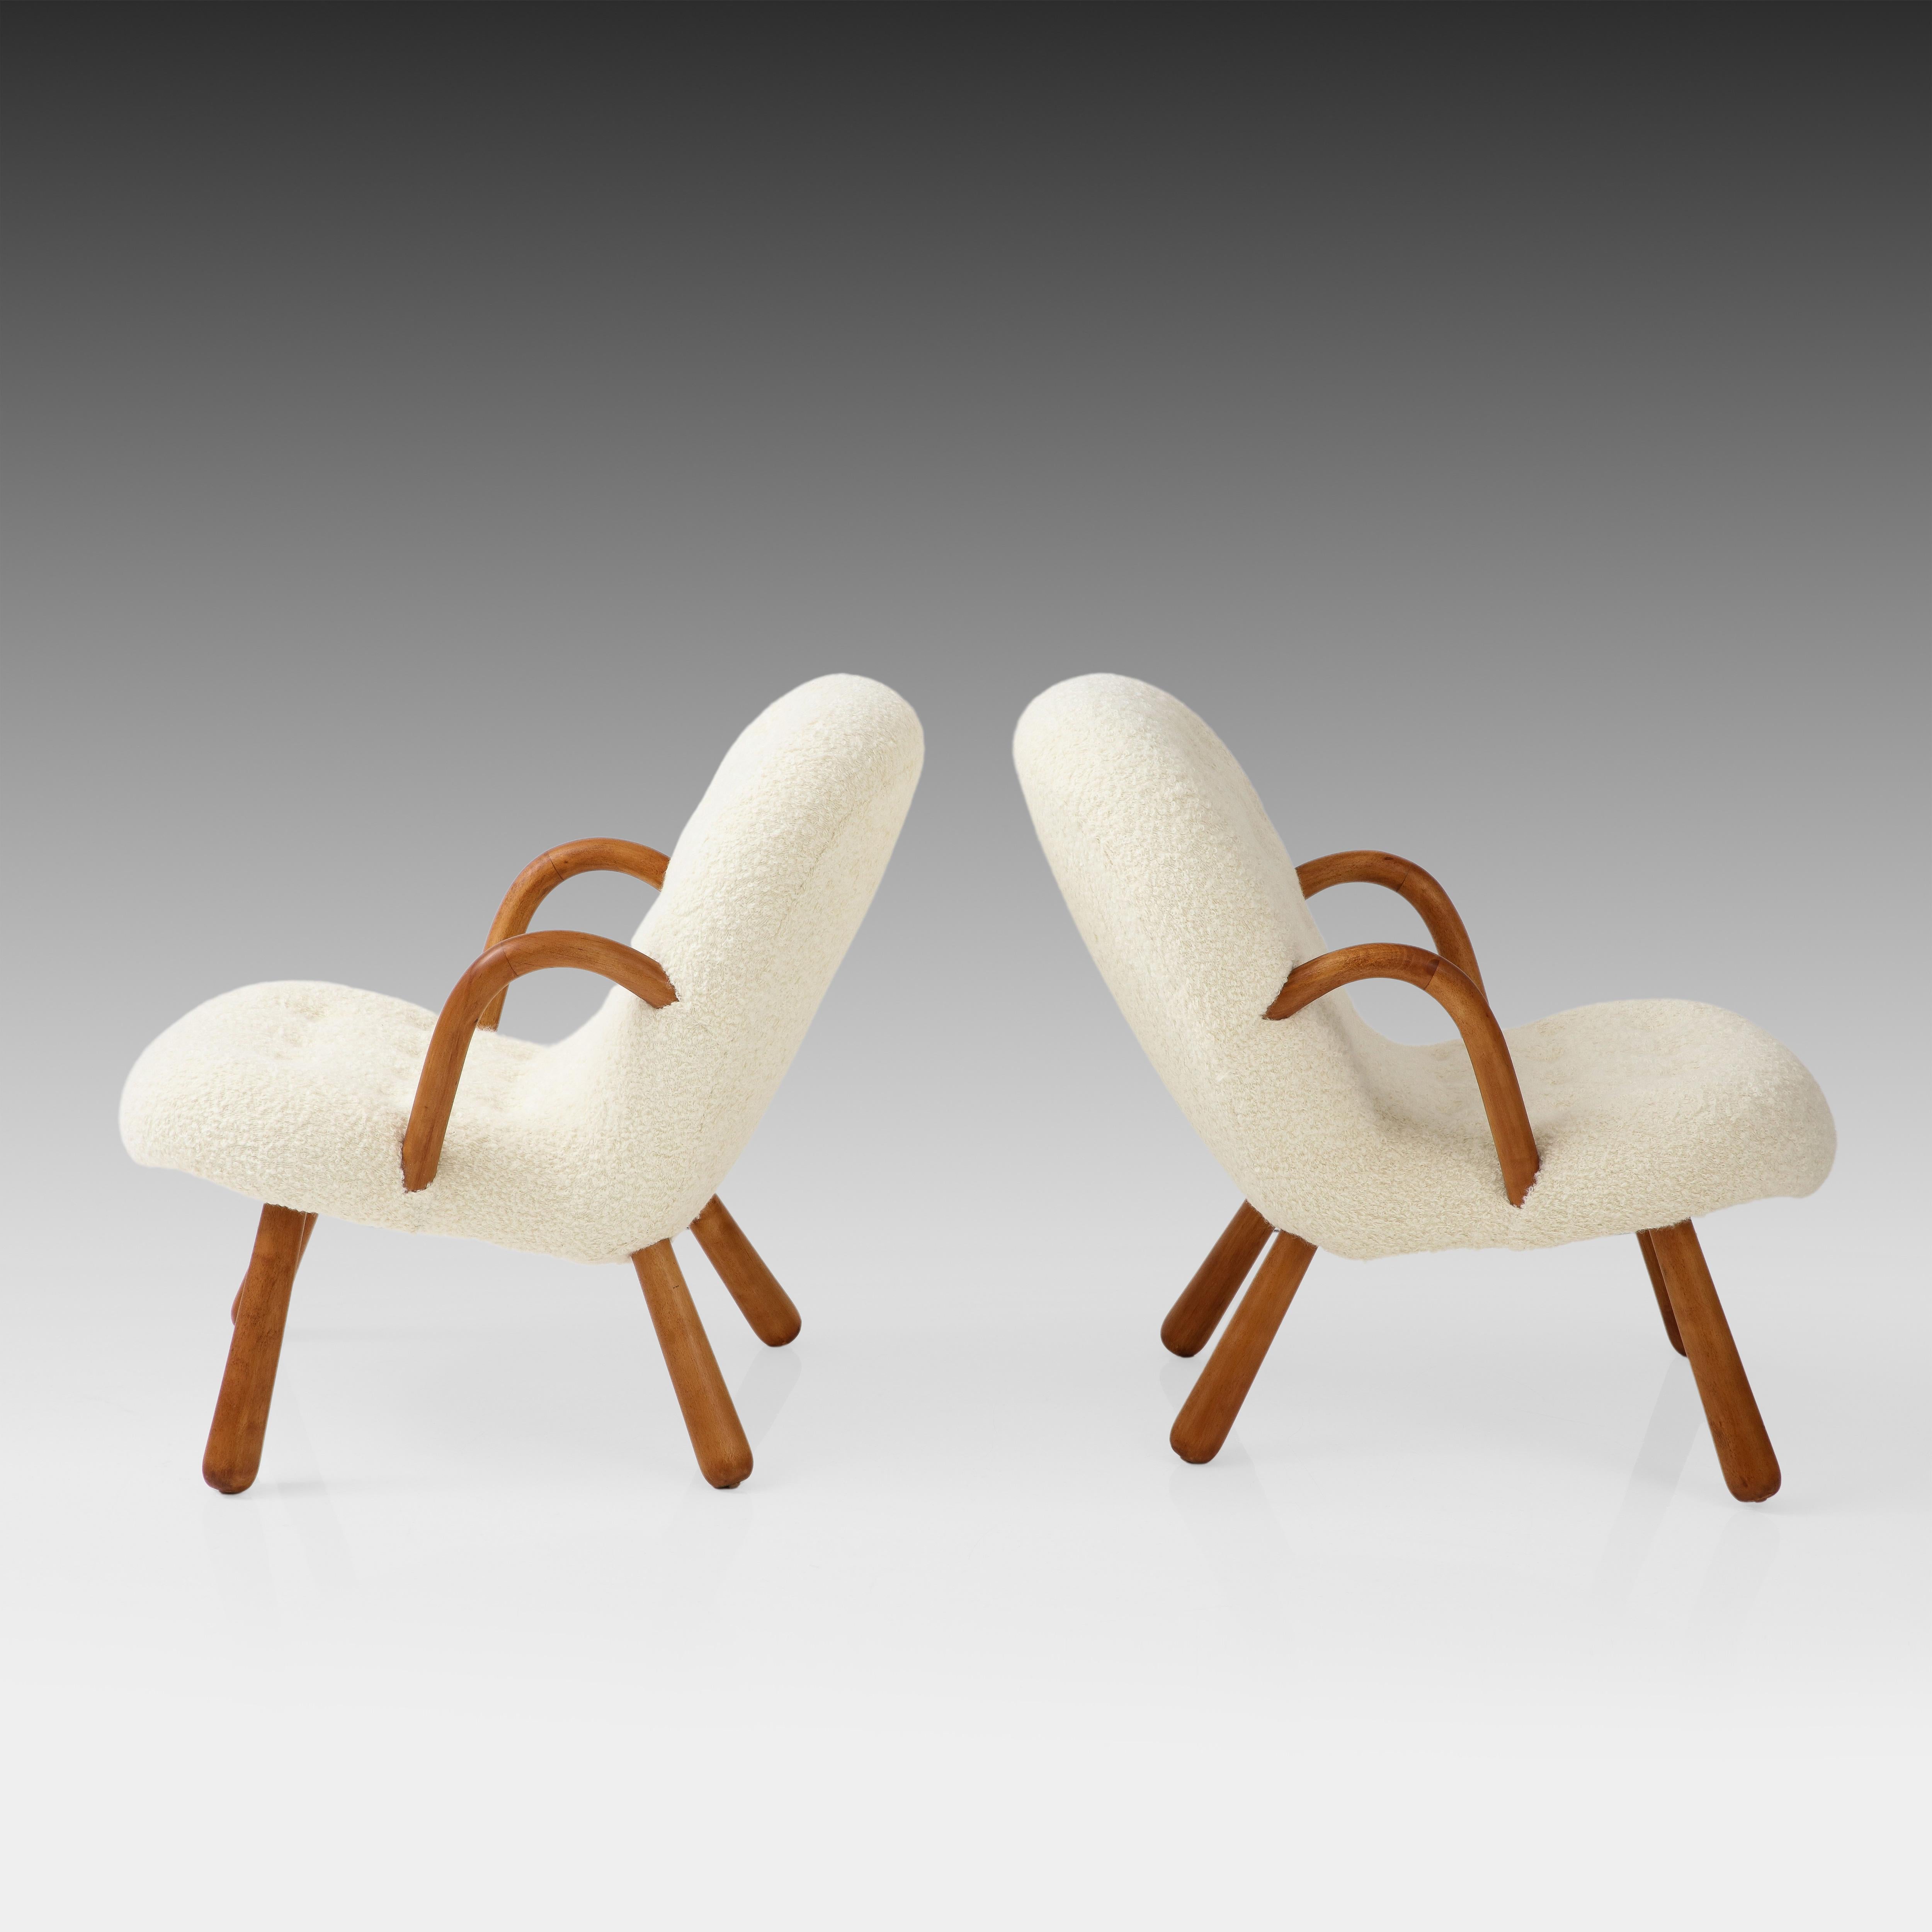 Danish Arnold Madsen for Madsen & Schubell Rare Pair of Clam Chairs, Denmark, 1944 For Sale